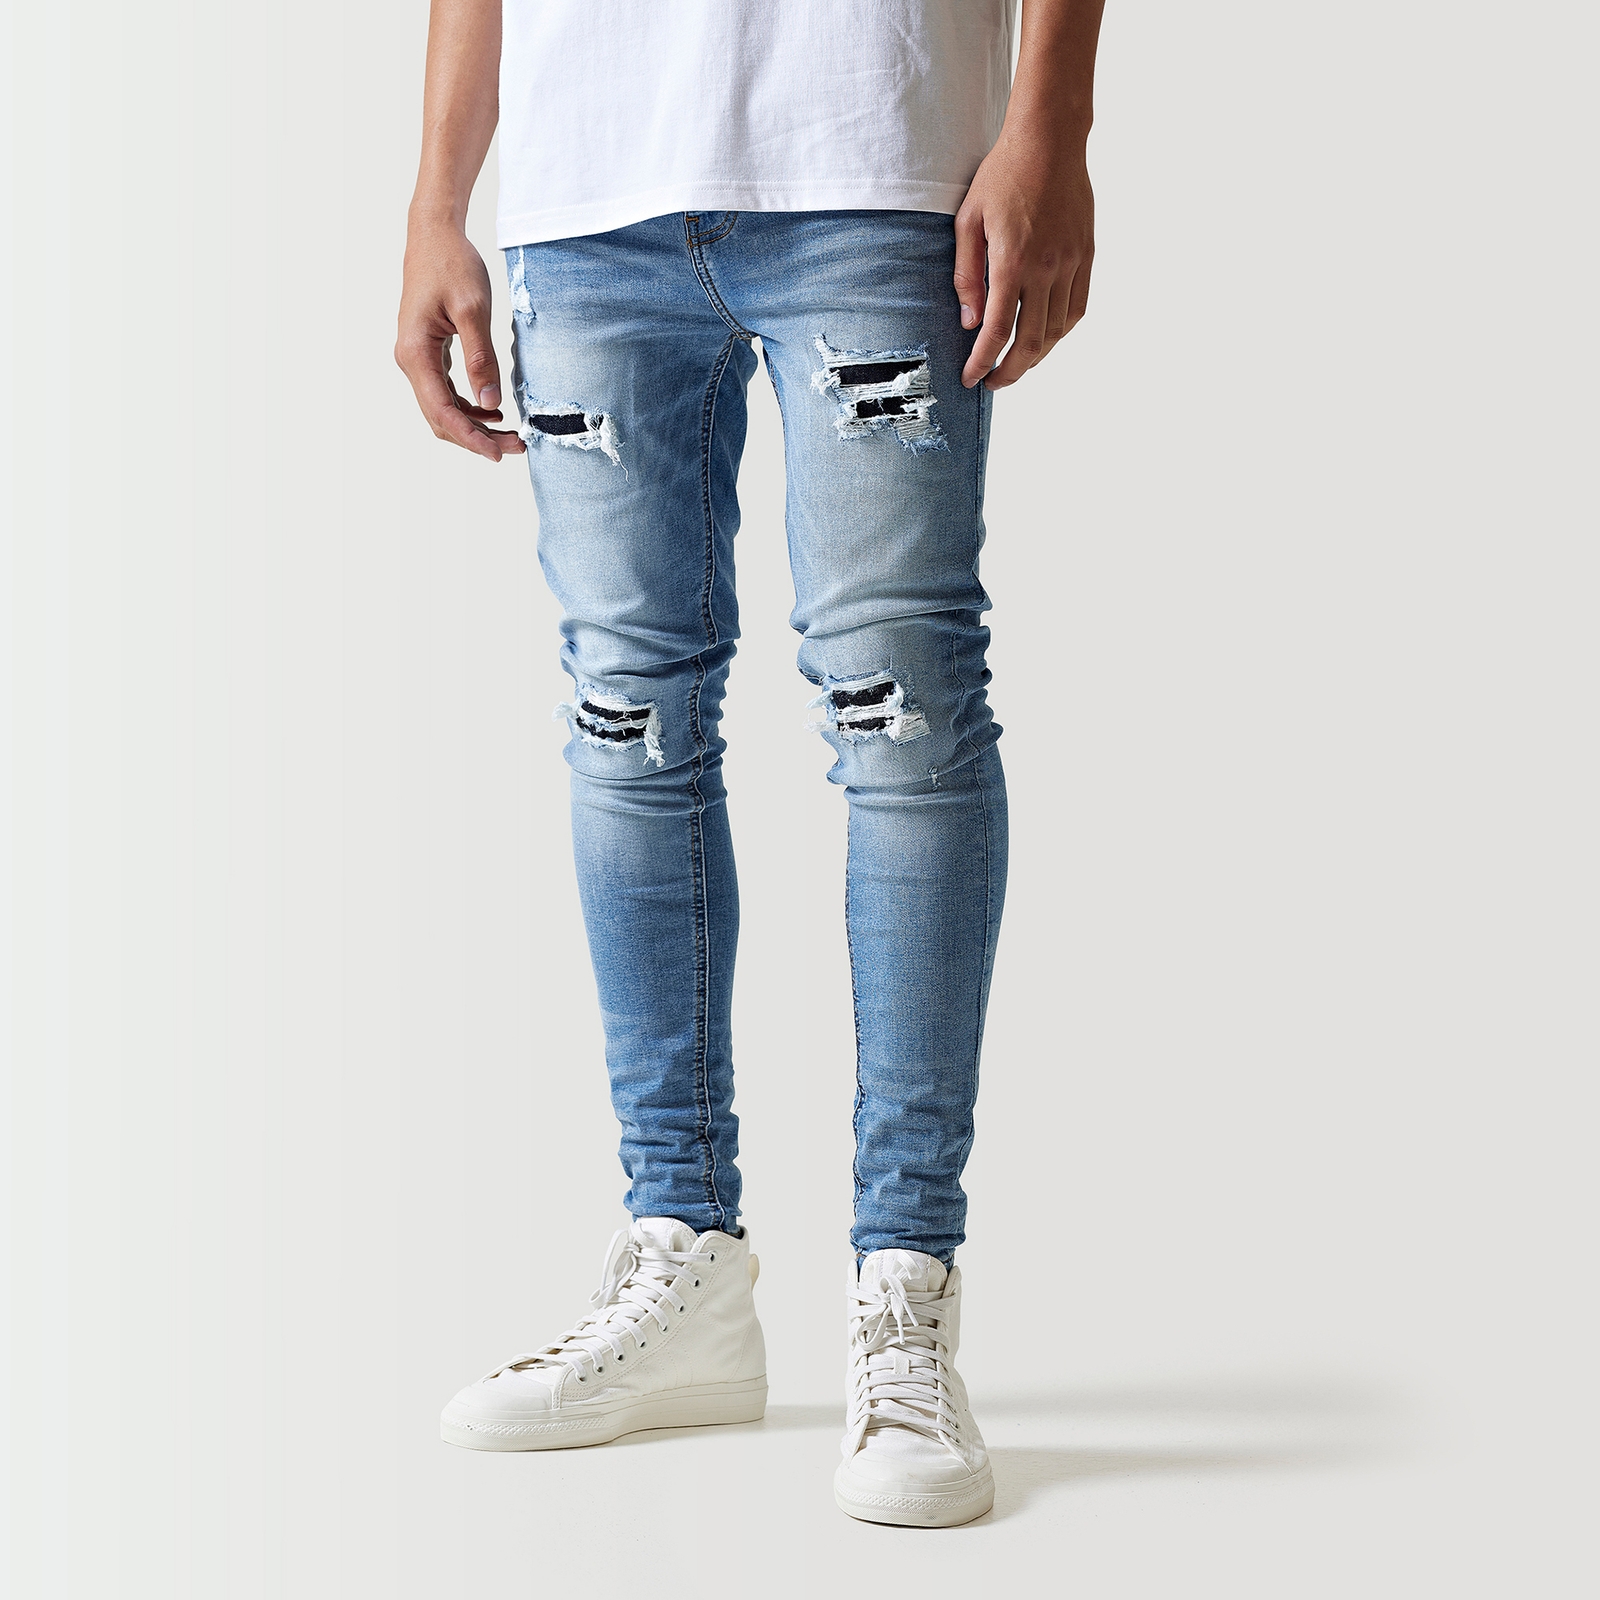 11 Degrees Sustainable Distressed Skinny Jeans - Stone Wash - W34 L32 from 11 Degrees